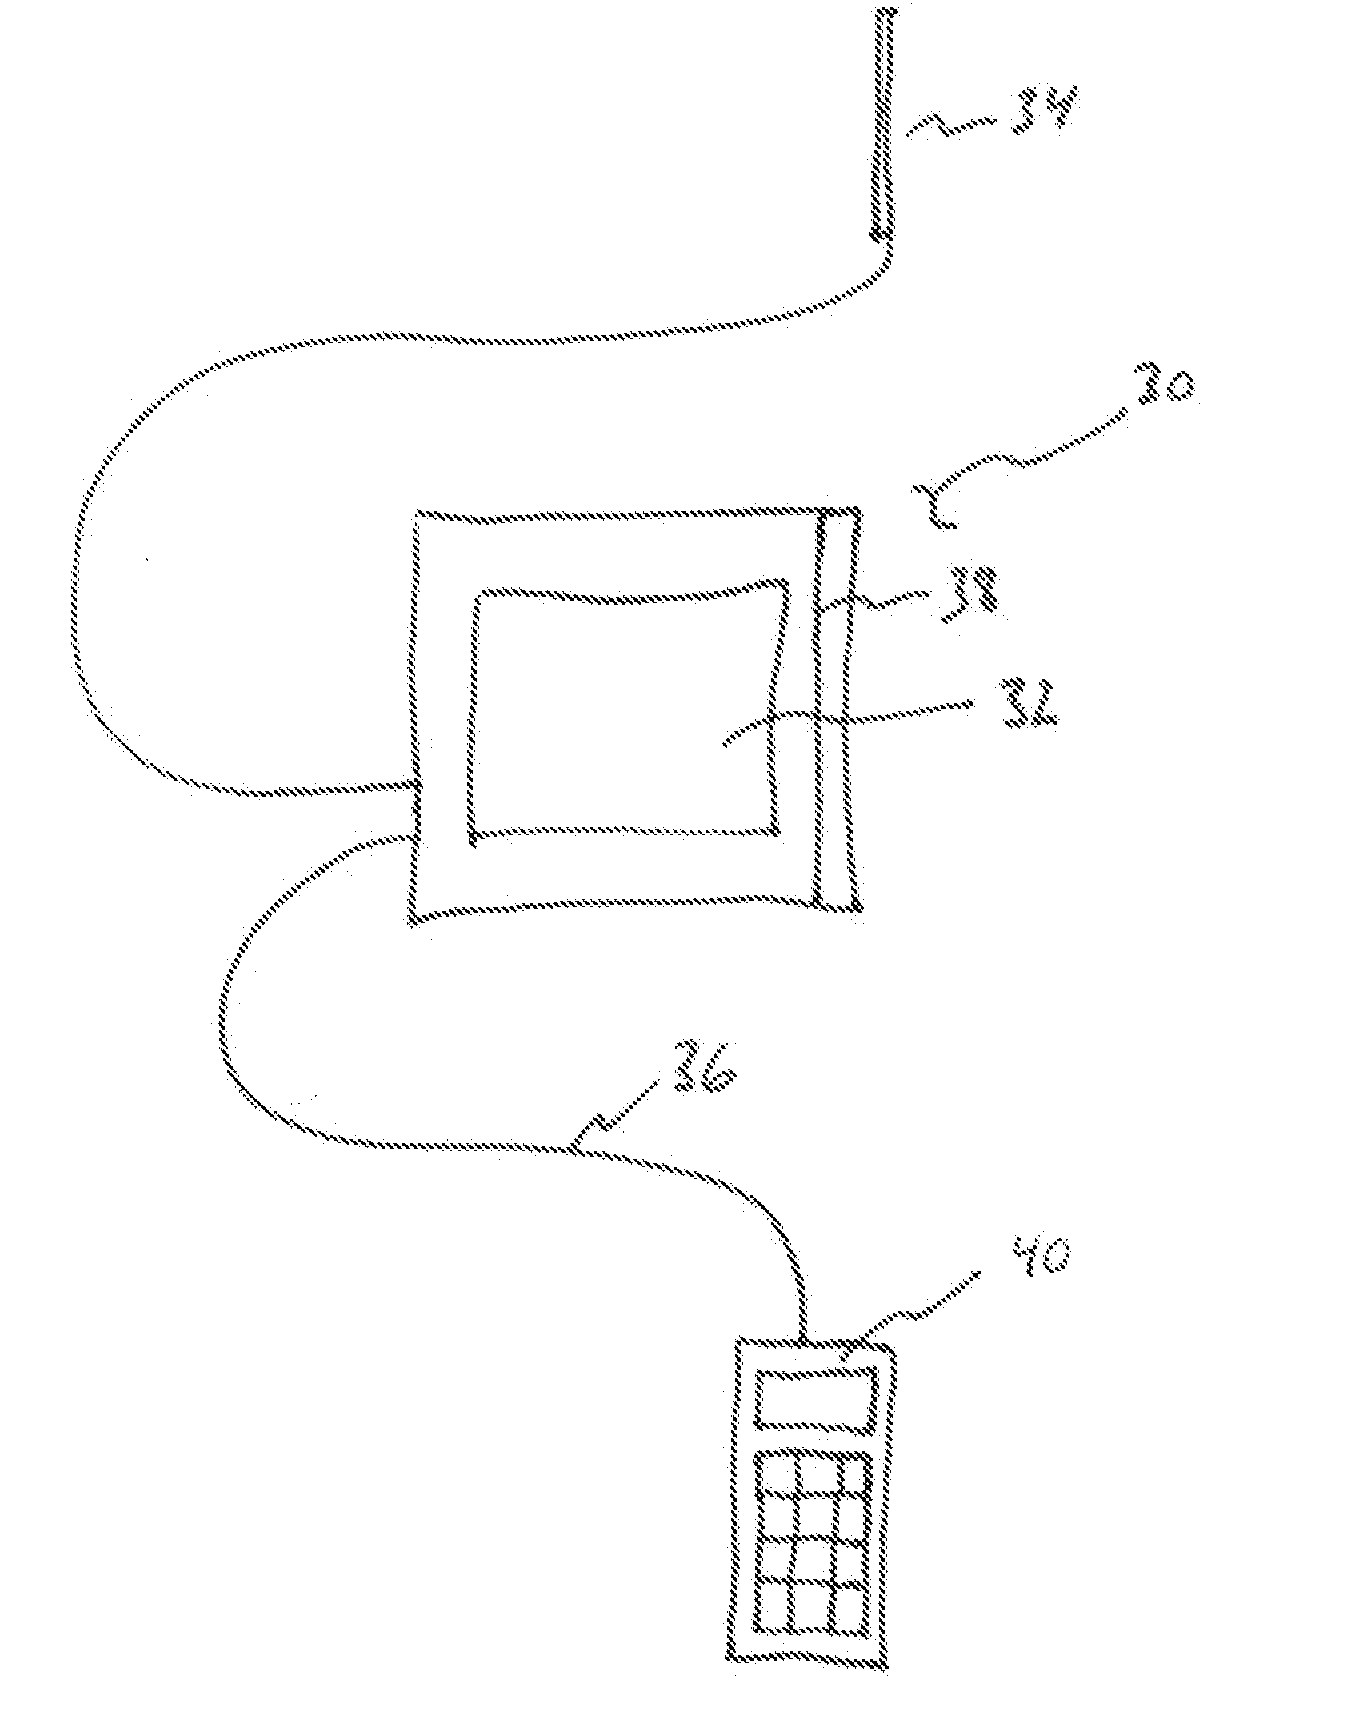 System for protecting pin data when using touch capacitive touch technology on a point-of-sale terminal or an encrypting pin pad device